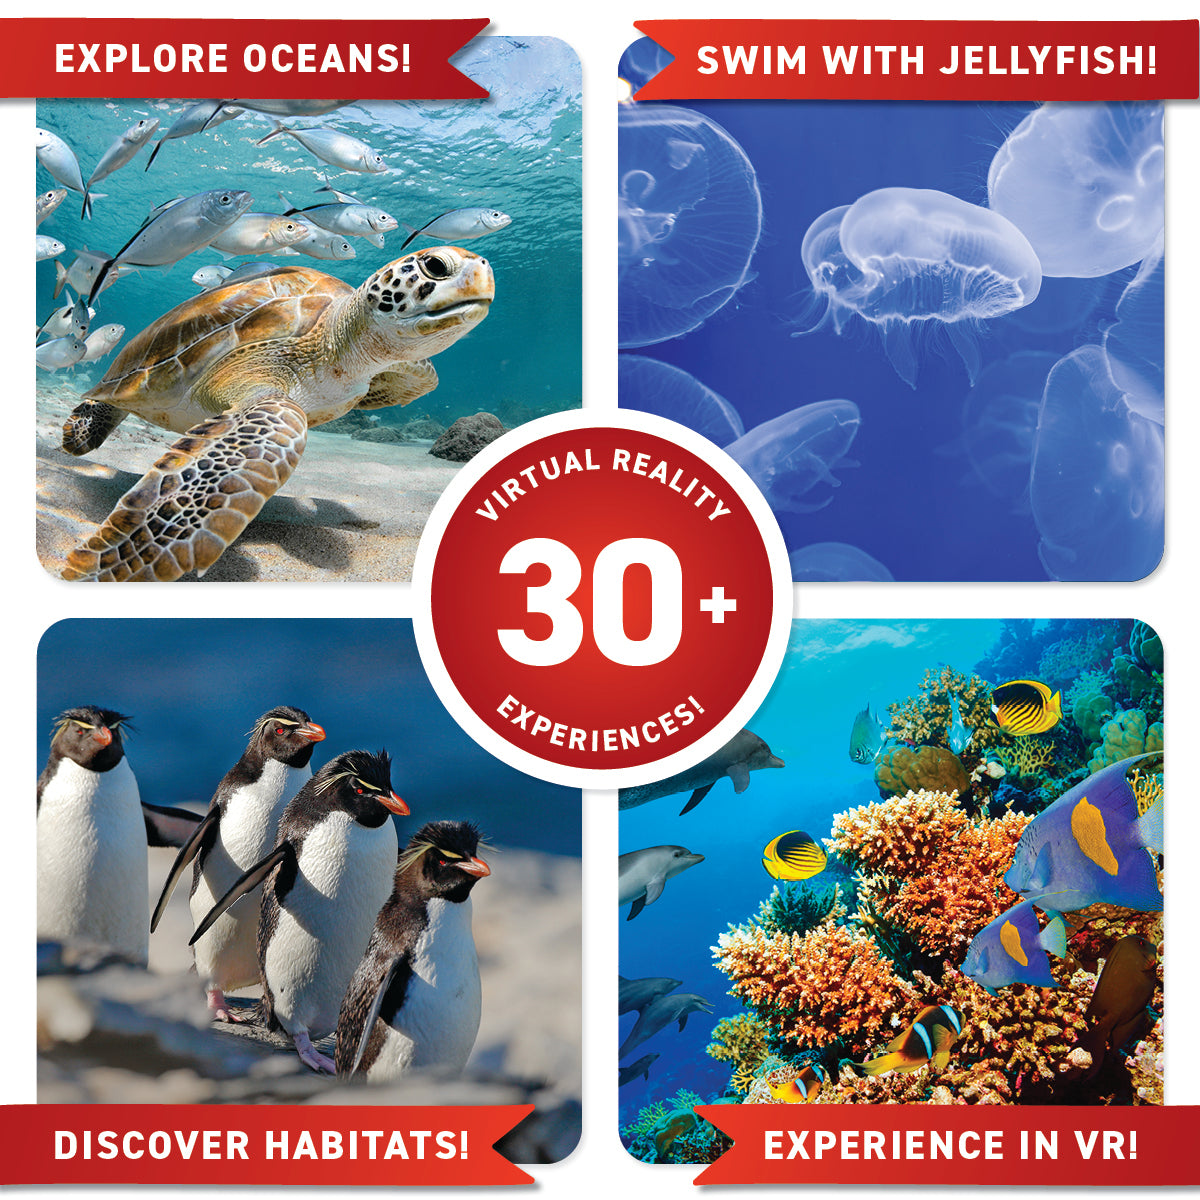 Virtual Reality Discovery Gift Set w/ DK Book - Oceans!